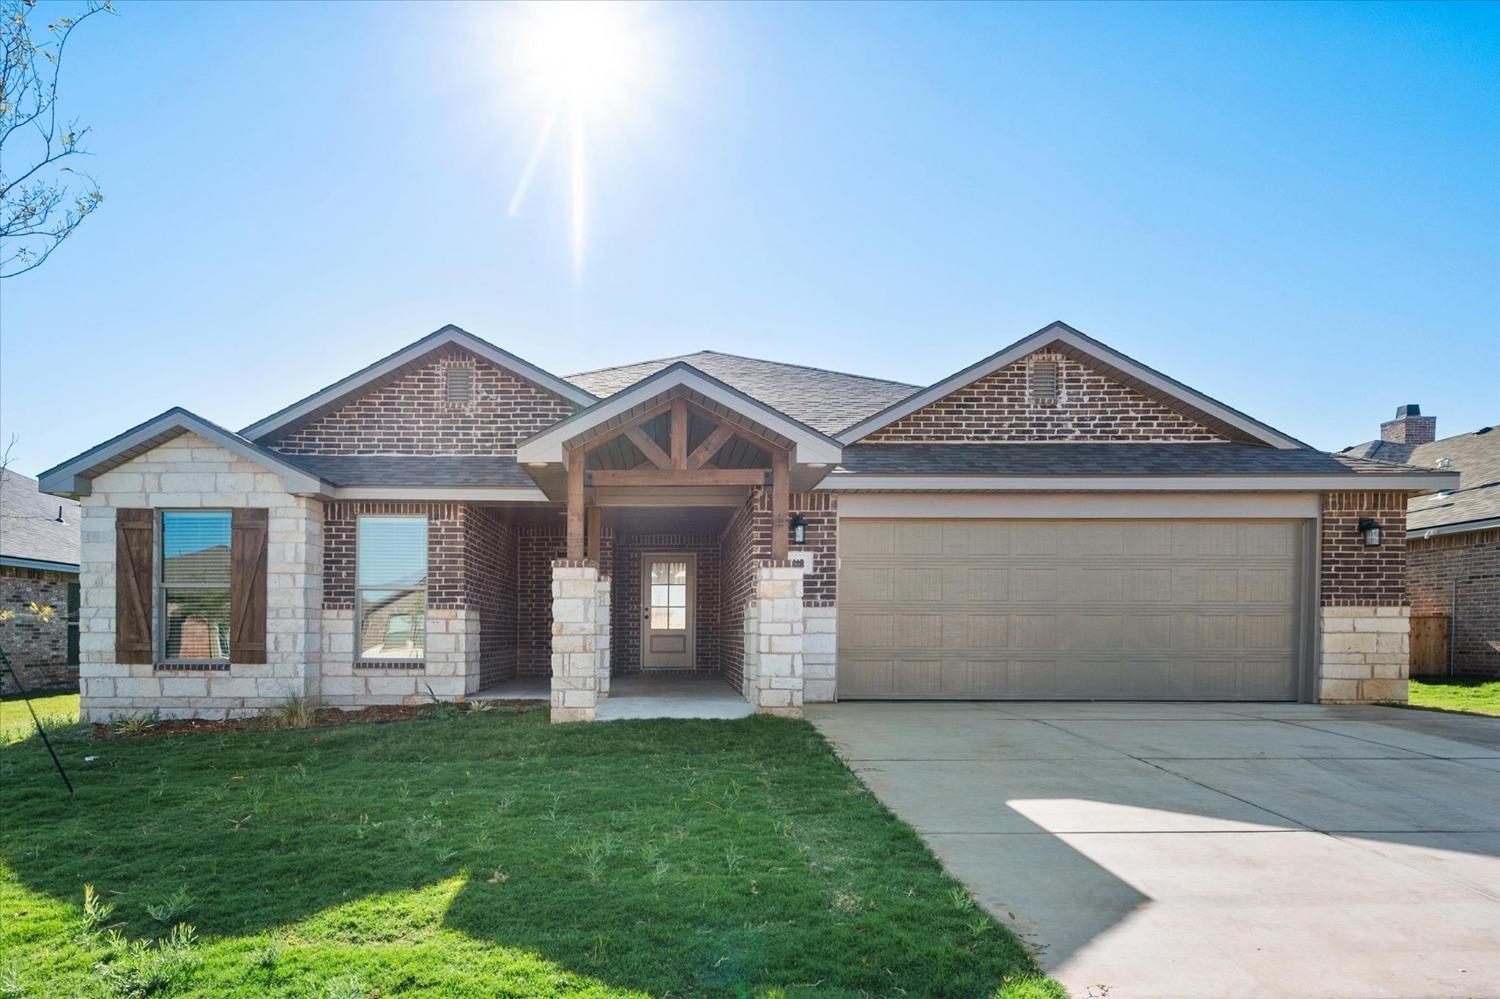 Up to $12K + 5.99% interest rate if we close before 11/20! Located in the Abbey Glenn community, this home is walking distance from United Supermarkets and minutes from H-E-B. Texas two-step your way through this ranch style front, and as you walk through the front door, a grand entryway will lead you into a spacious and bright living space, coupled with a large kitchen island and breakfast nook. Complete with a flex space that offers functionality as a playroom or luxury as a formal dining space, you'll be well on your way to being the premier hosting destination. When it's time to relax, the secluded master suite and standalone tub provide a slice of paradise. If you aren't sold on this 4 bedroom, 3 bathroom new build yet, the full-laundry room, additional storage areas, in-law suite and extra-wide 2-car garage will seal the deal. To make this new home yours, contact us today!